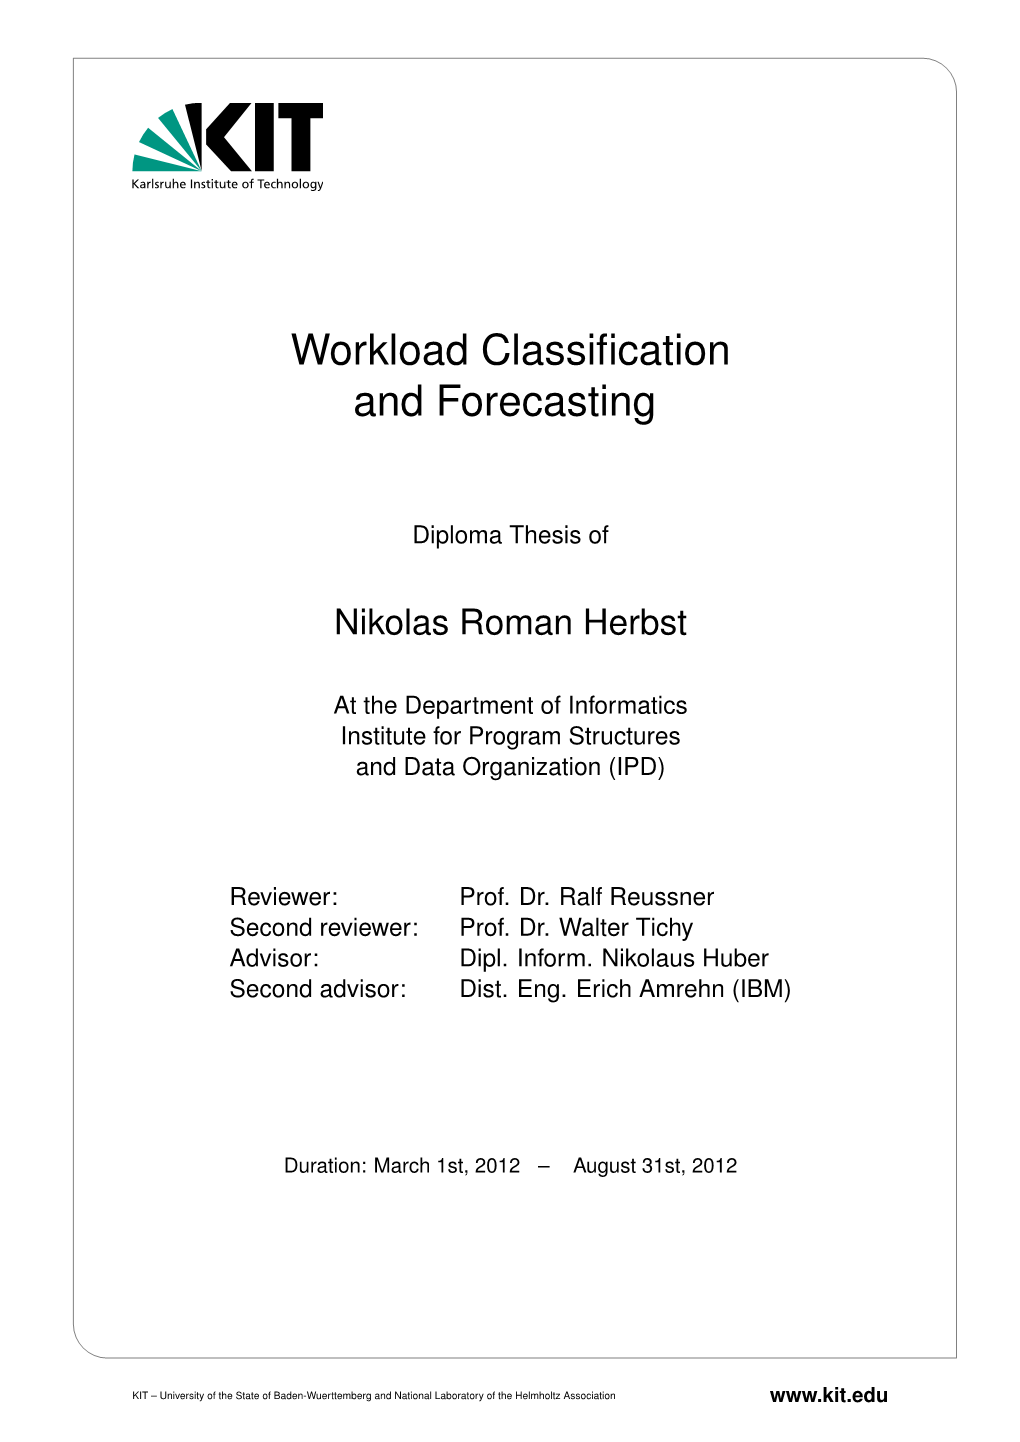 Workload Classification and Forecasting